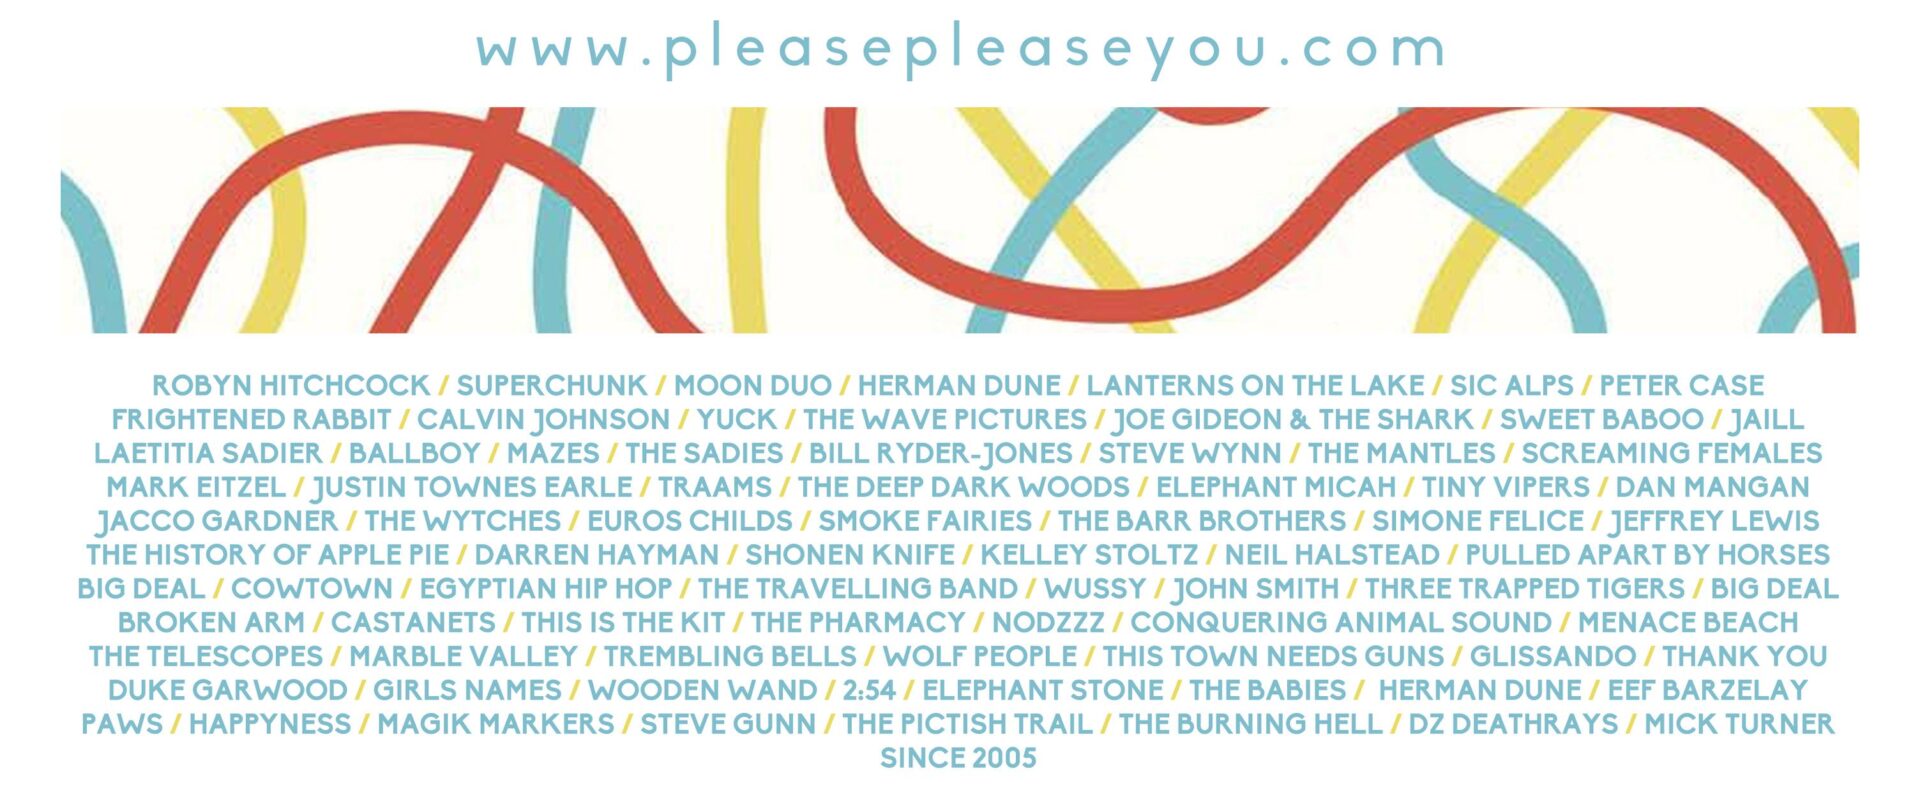 PREVIEW: upcoming shows for early 2017 from Please Please You